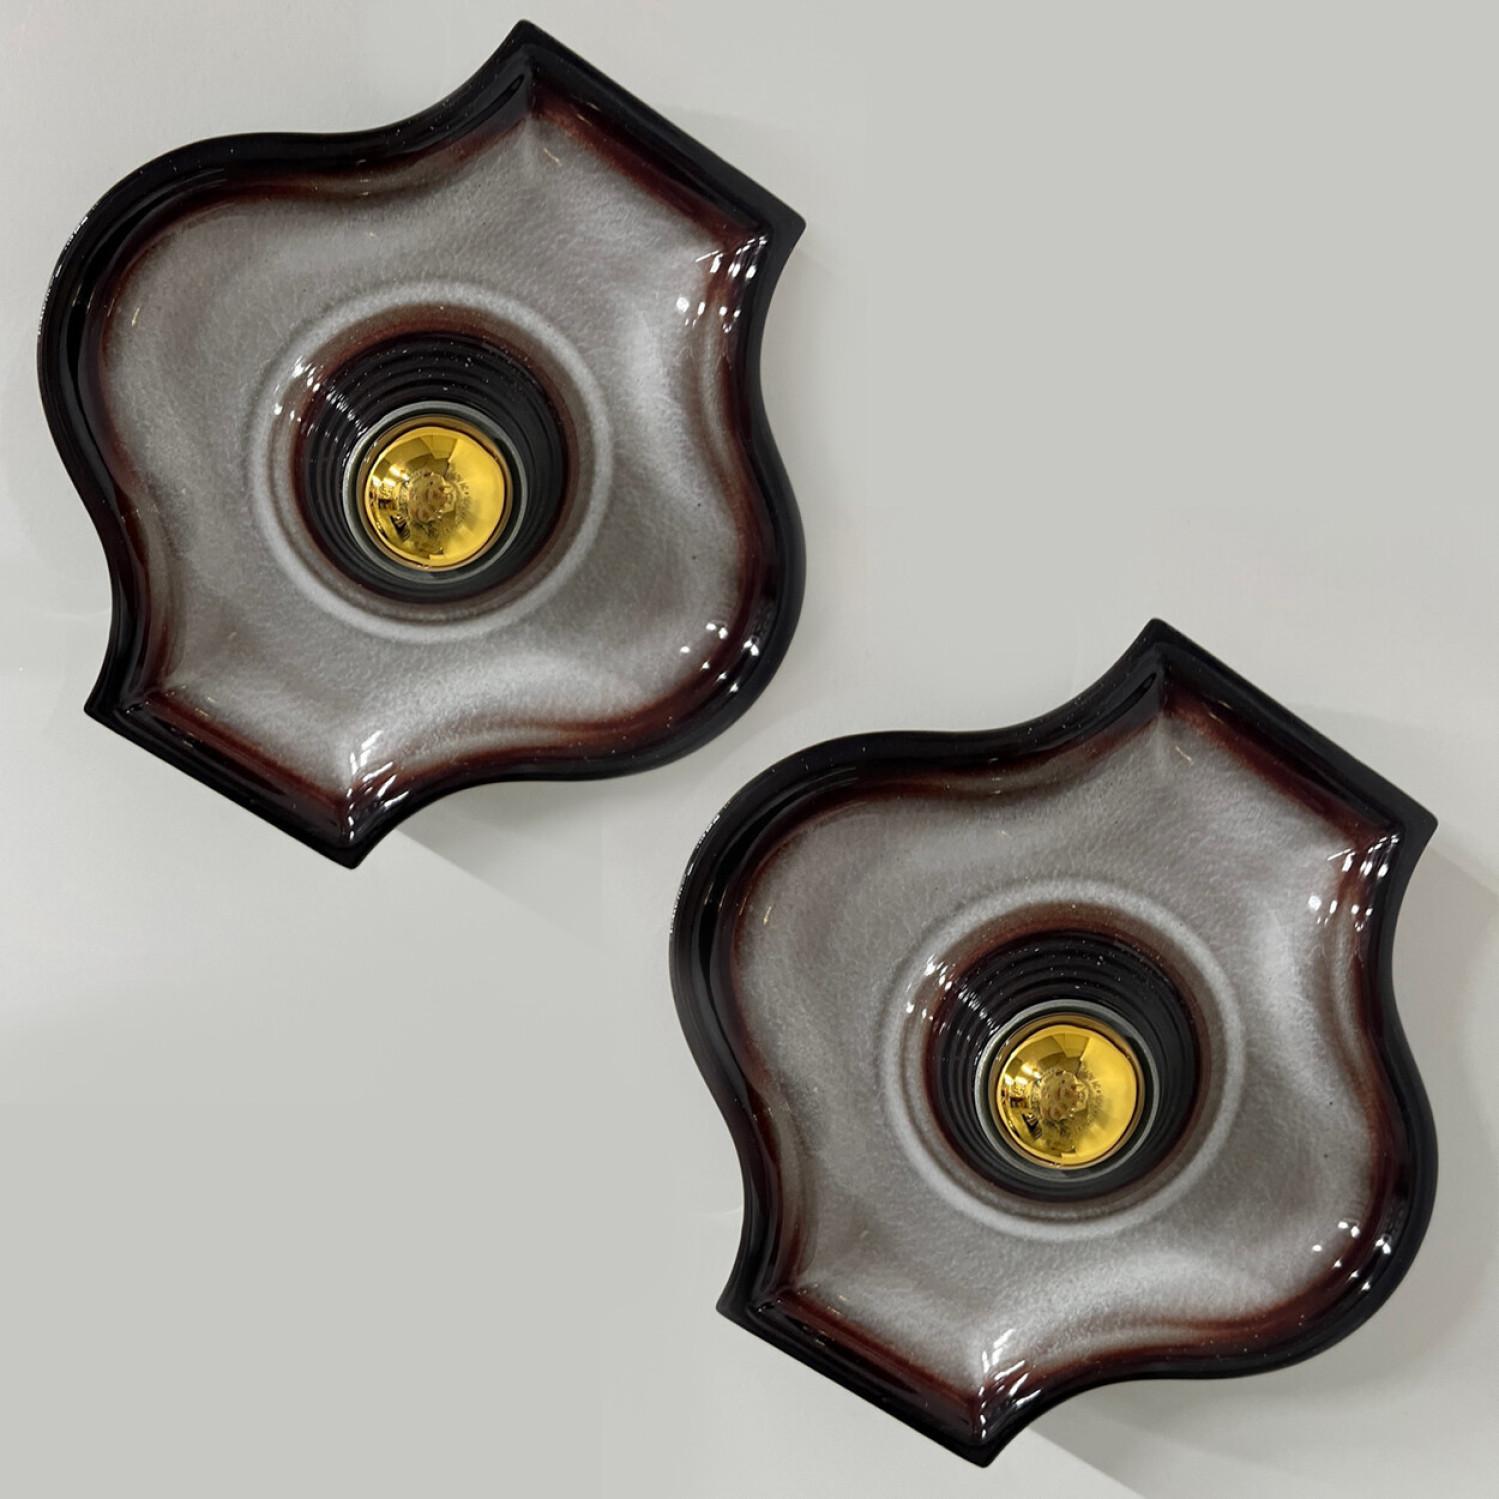 1 of 2 Oval Grey Brown Ceramic Wall Lights by Hustadt Keramik, Germany, 1970 For Sale 3